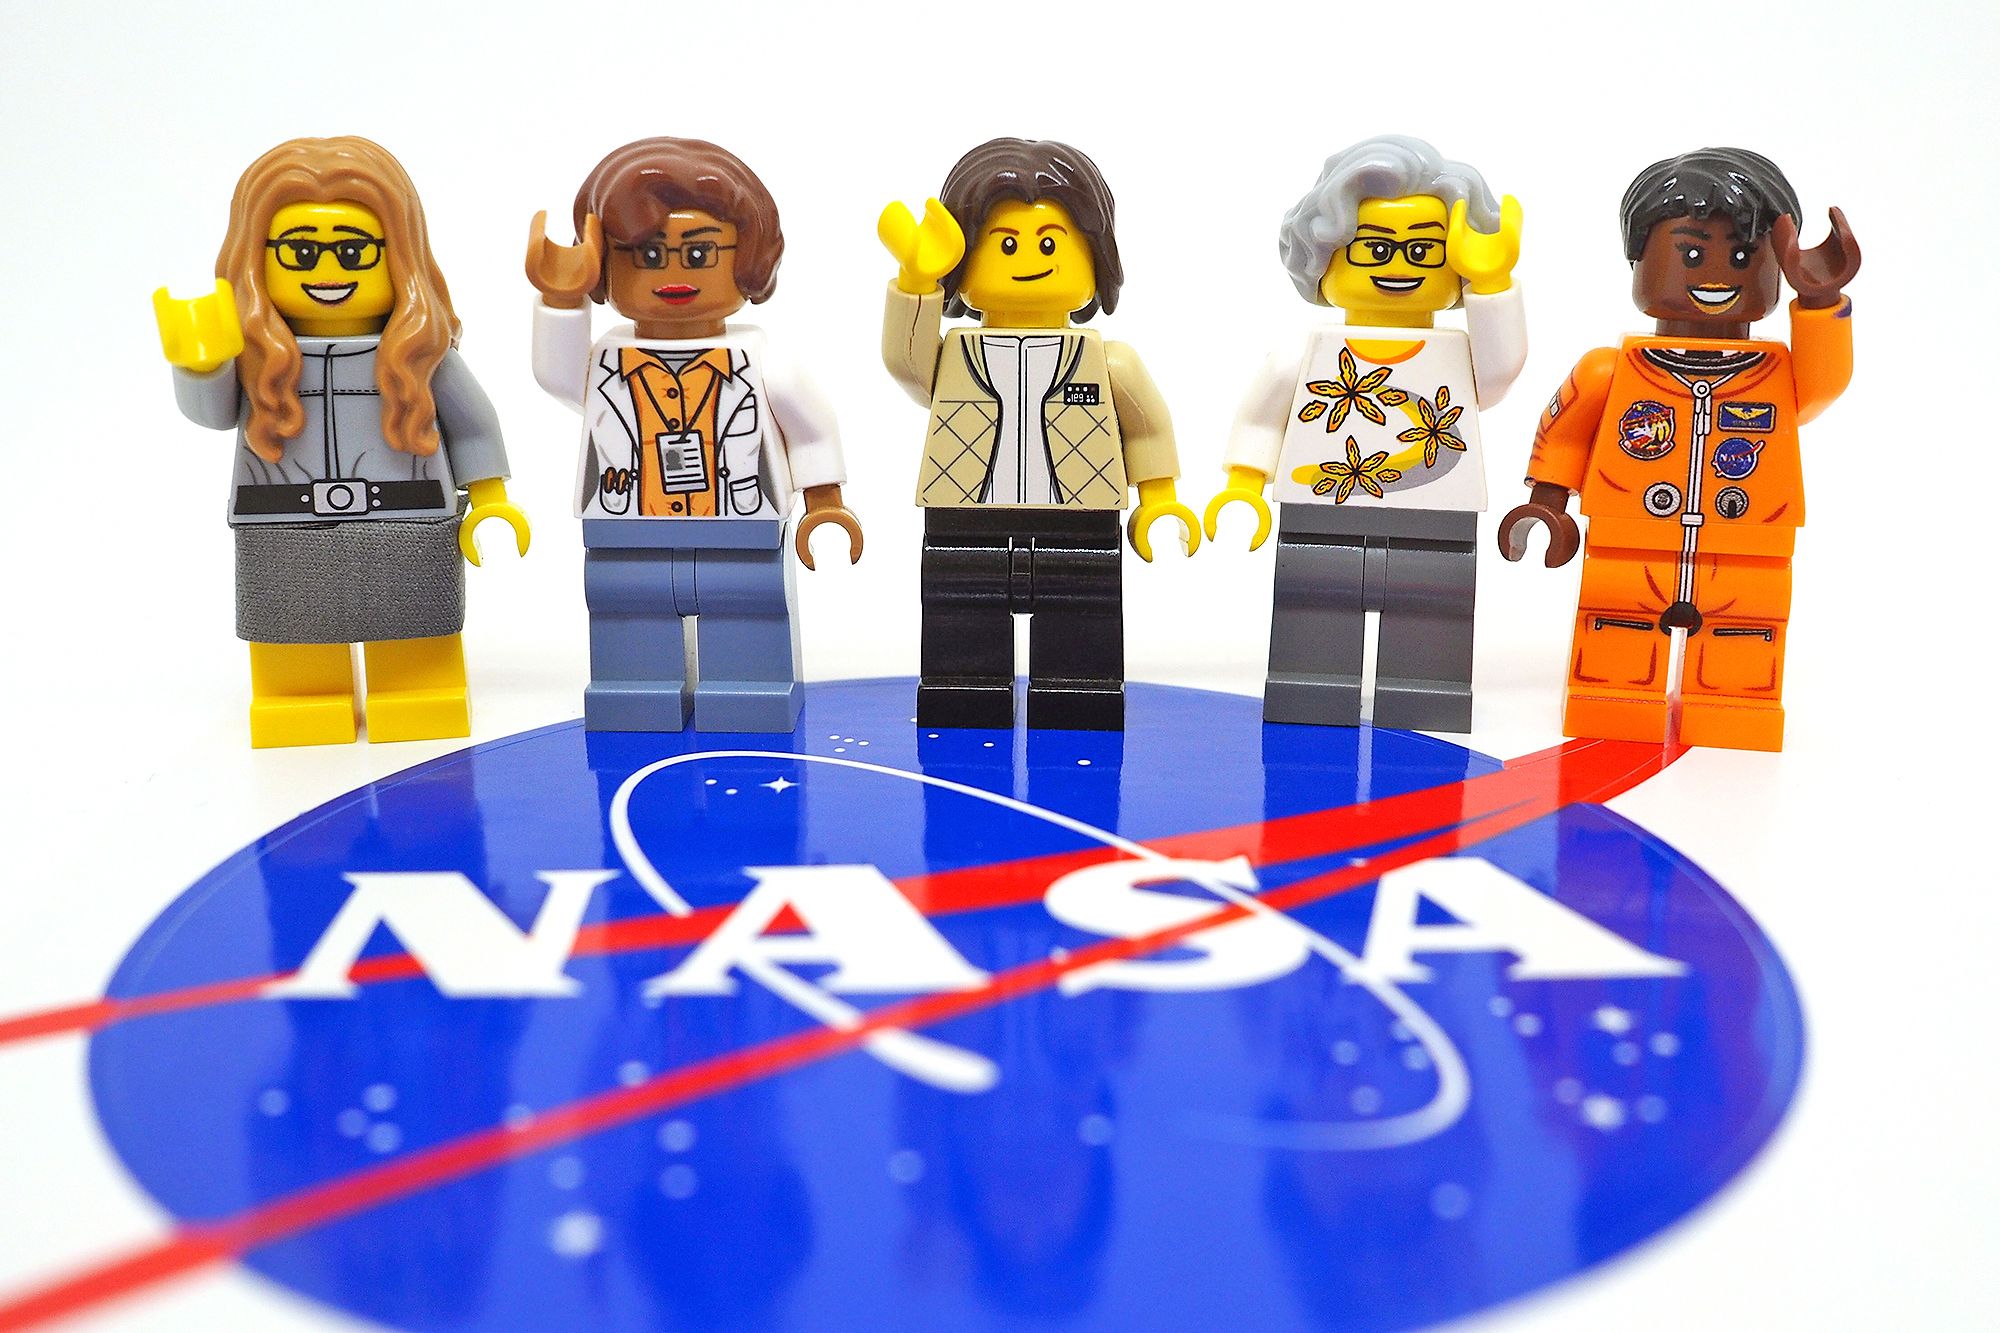 Girls' Legos Are A Hit, But Why Do Girls Need Special Legos? : NPR